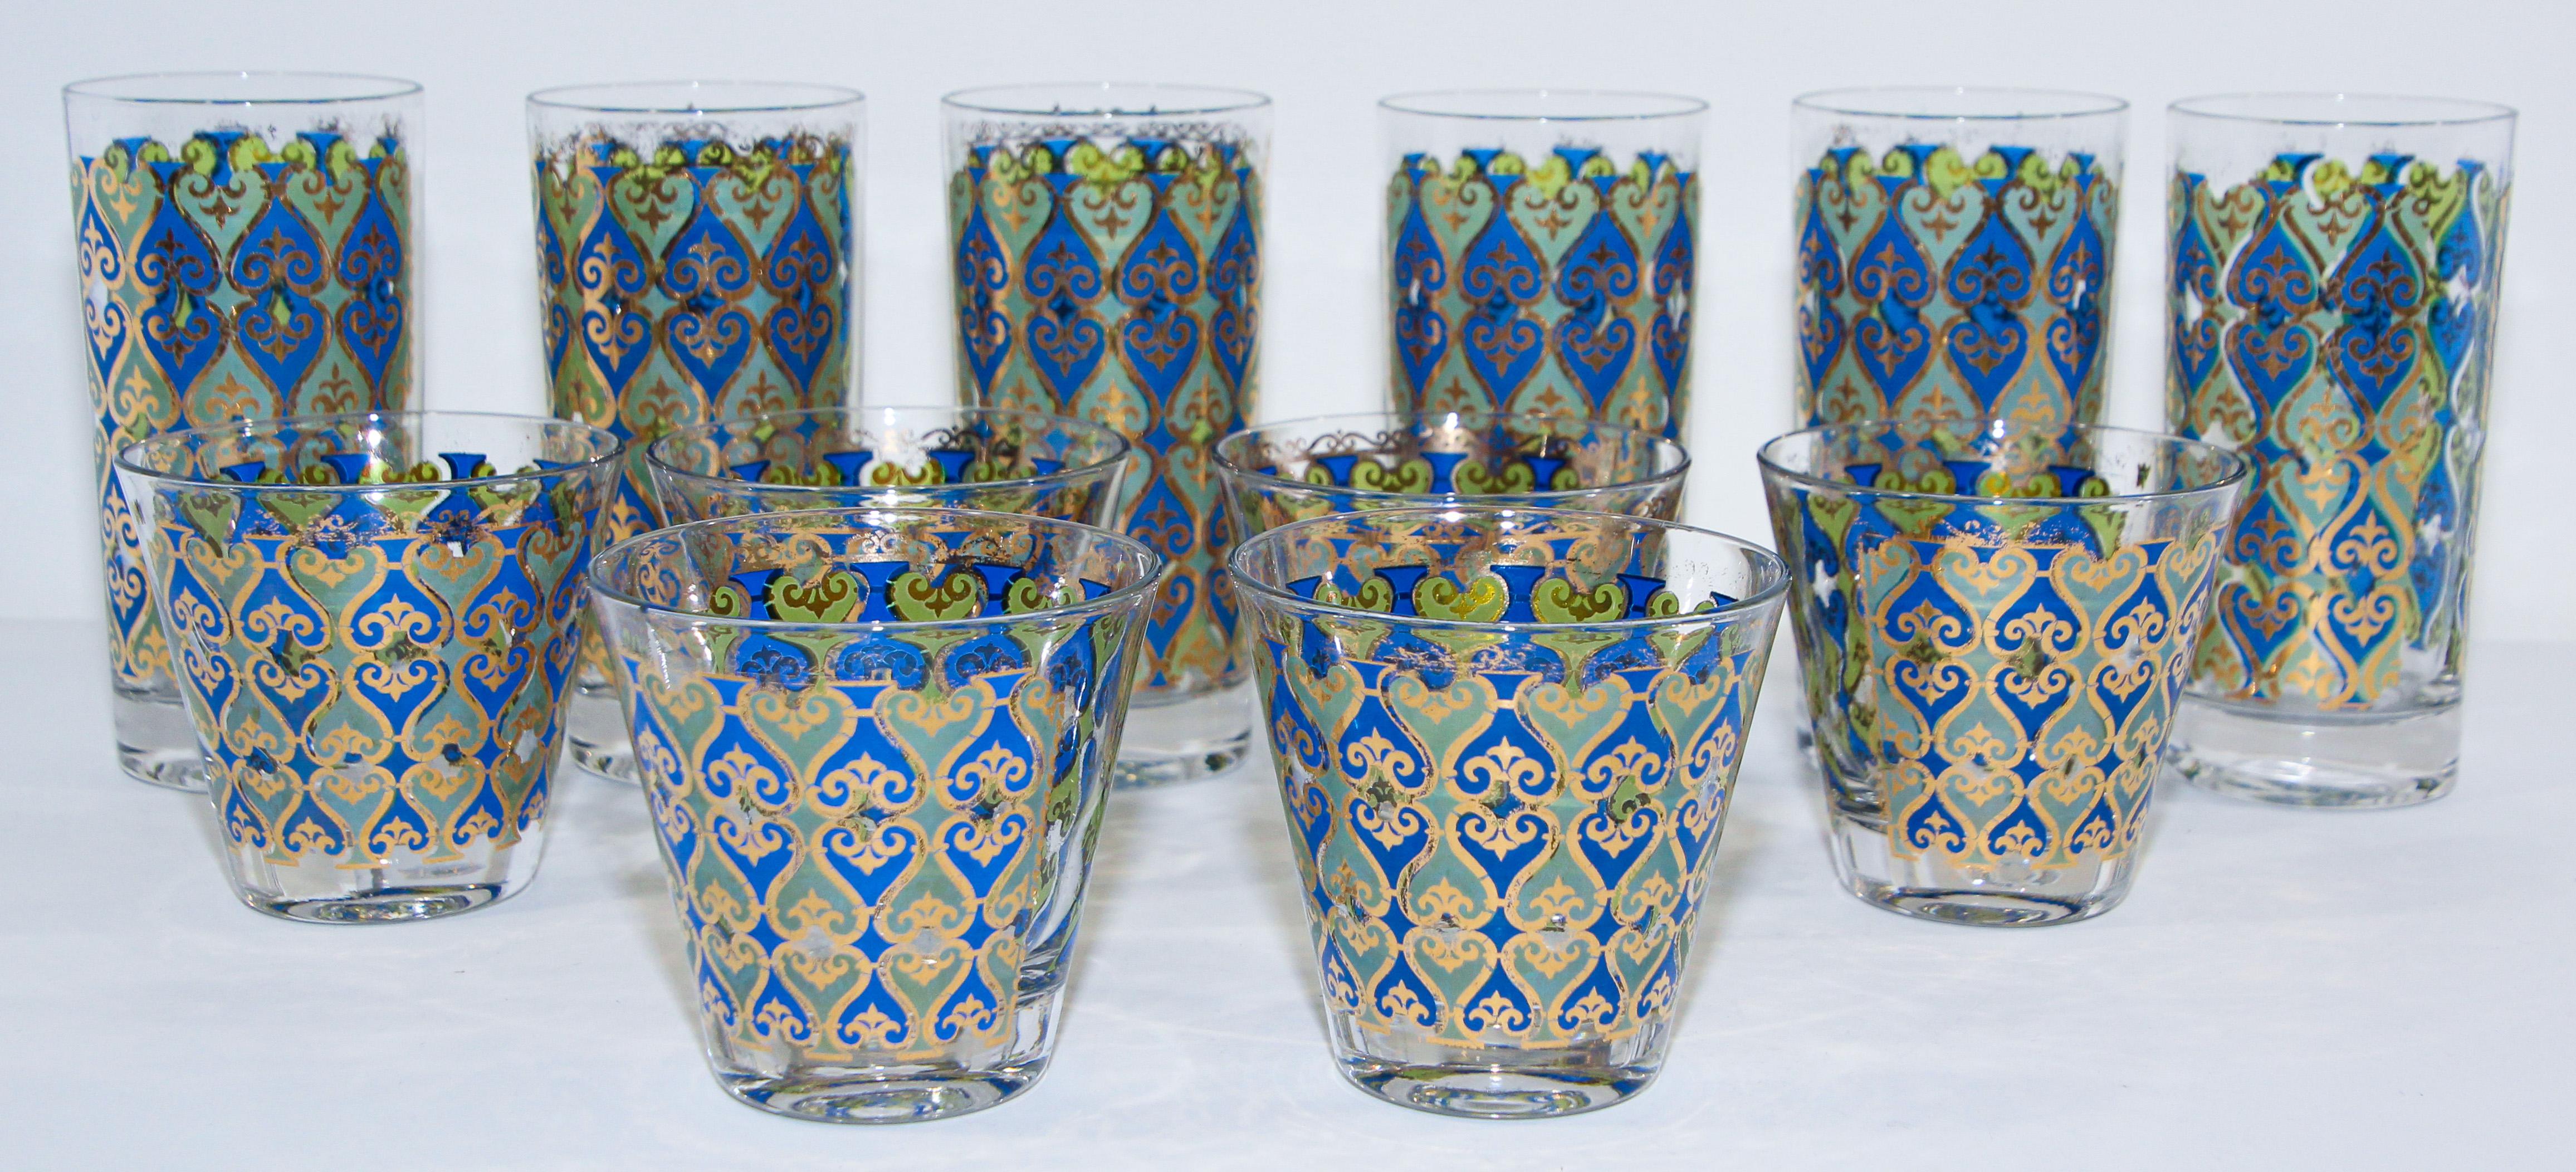 Mid-Century Modern Vintage Set of 12 Barware Glasses Blue and Gold by Georges Briard